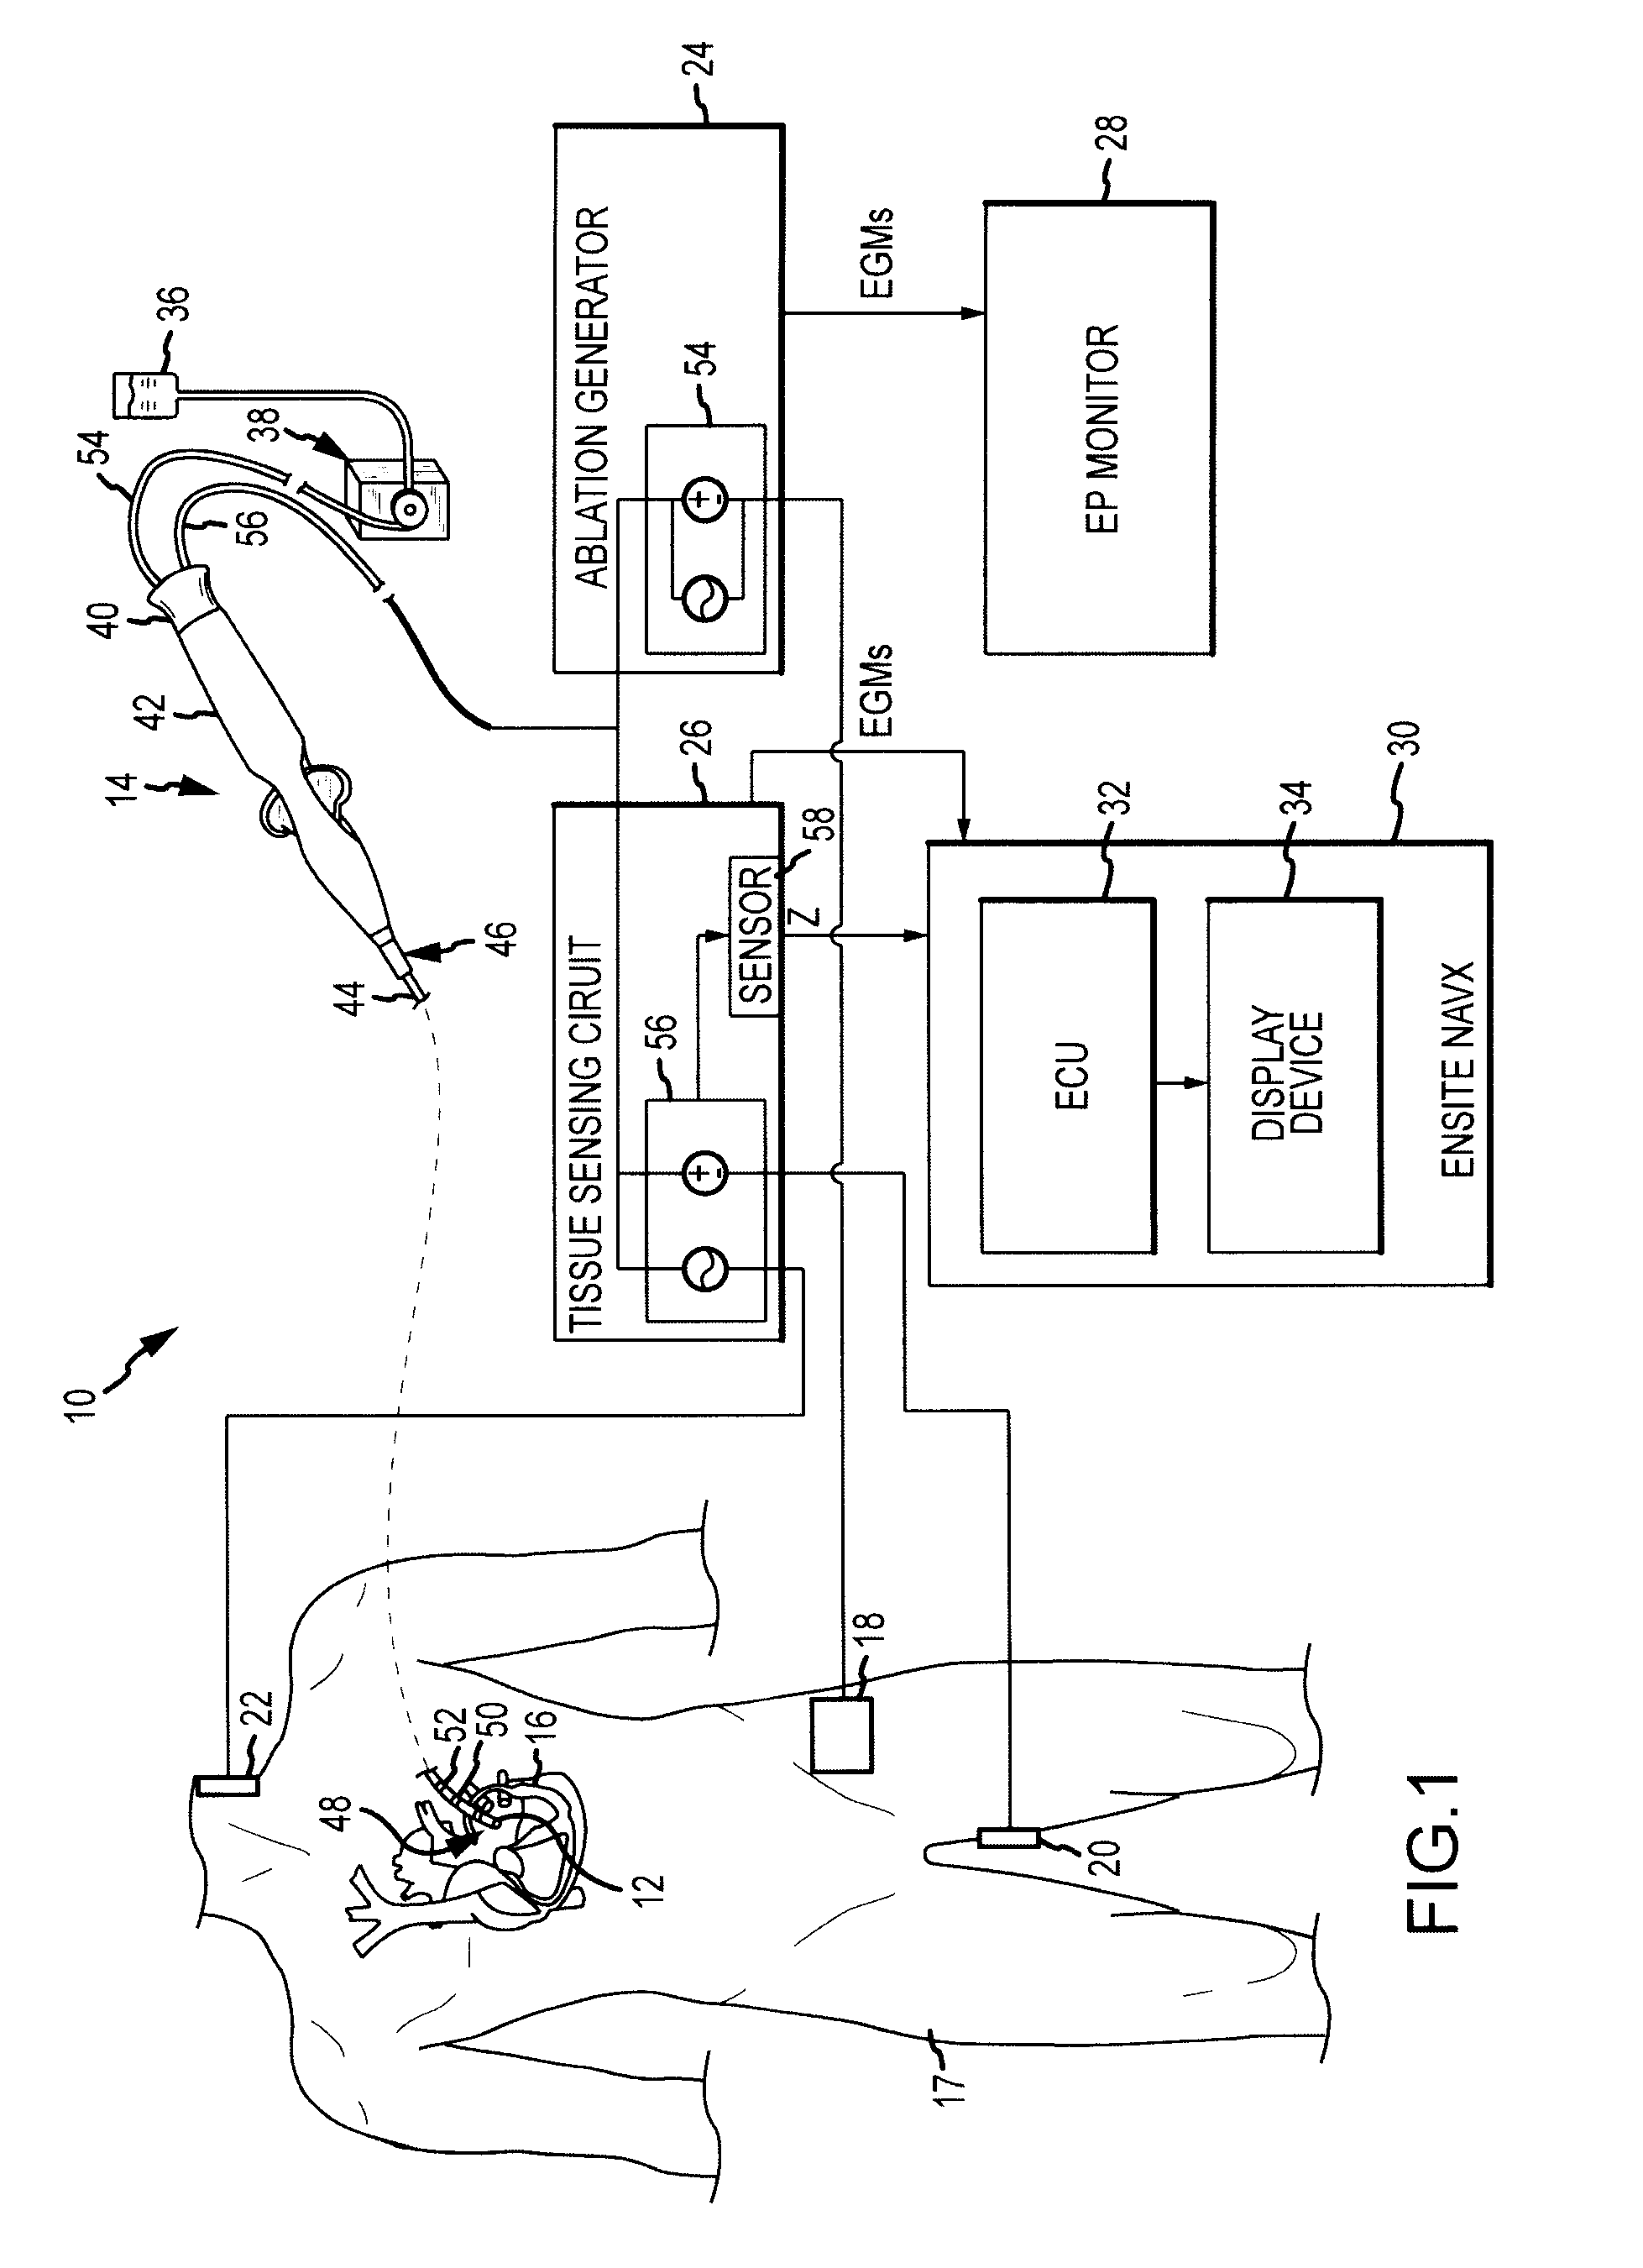 System and method for assessing coupling between an electrode and tissue